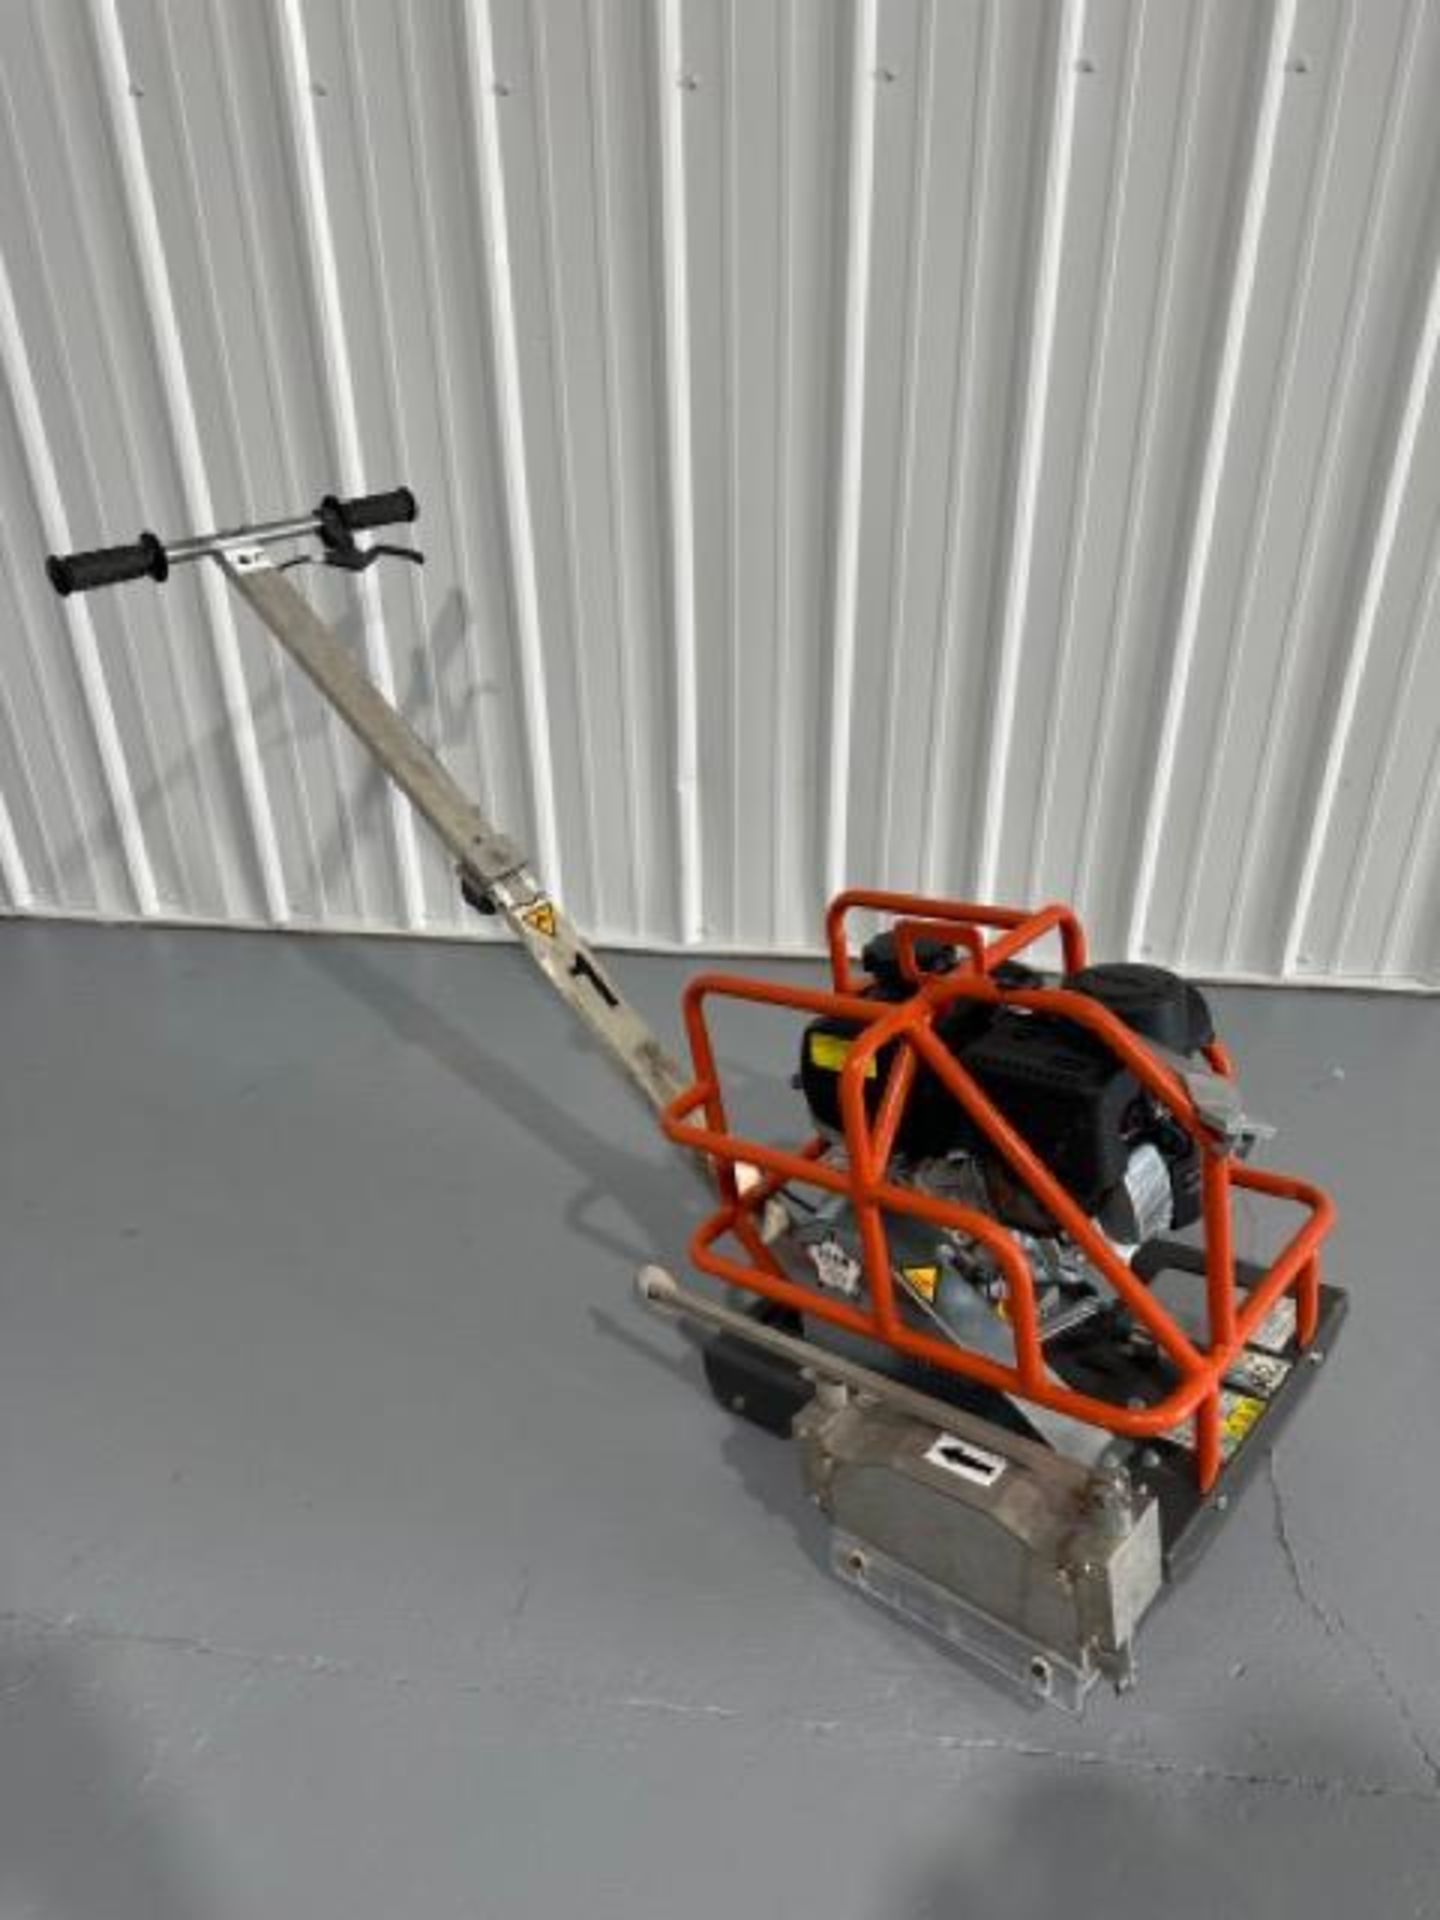 Husqvarna Soff-Cut 150 6" early entry concrete saw with Kohler Command Pro 5.5hp gas engine - Image 5 of 8